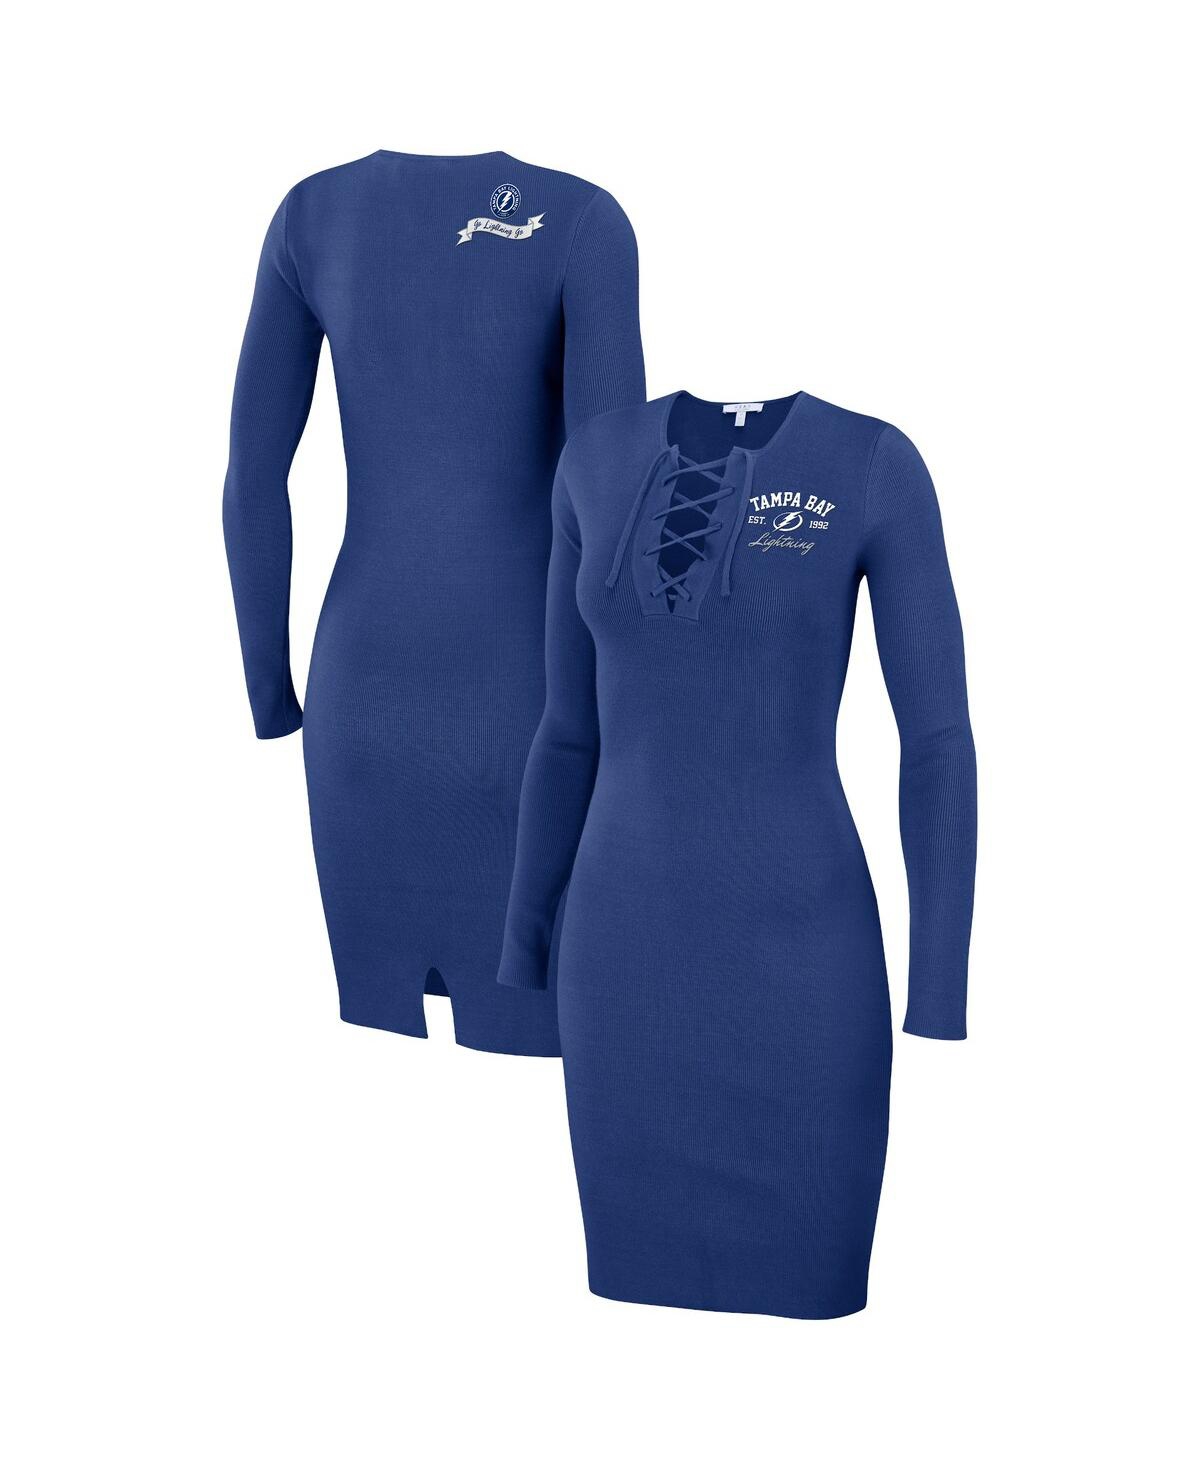 Women's Wear by Erin Andrews Blue Tampa Bay Lightning Lace-Up Dress - Blue